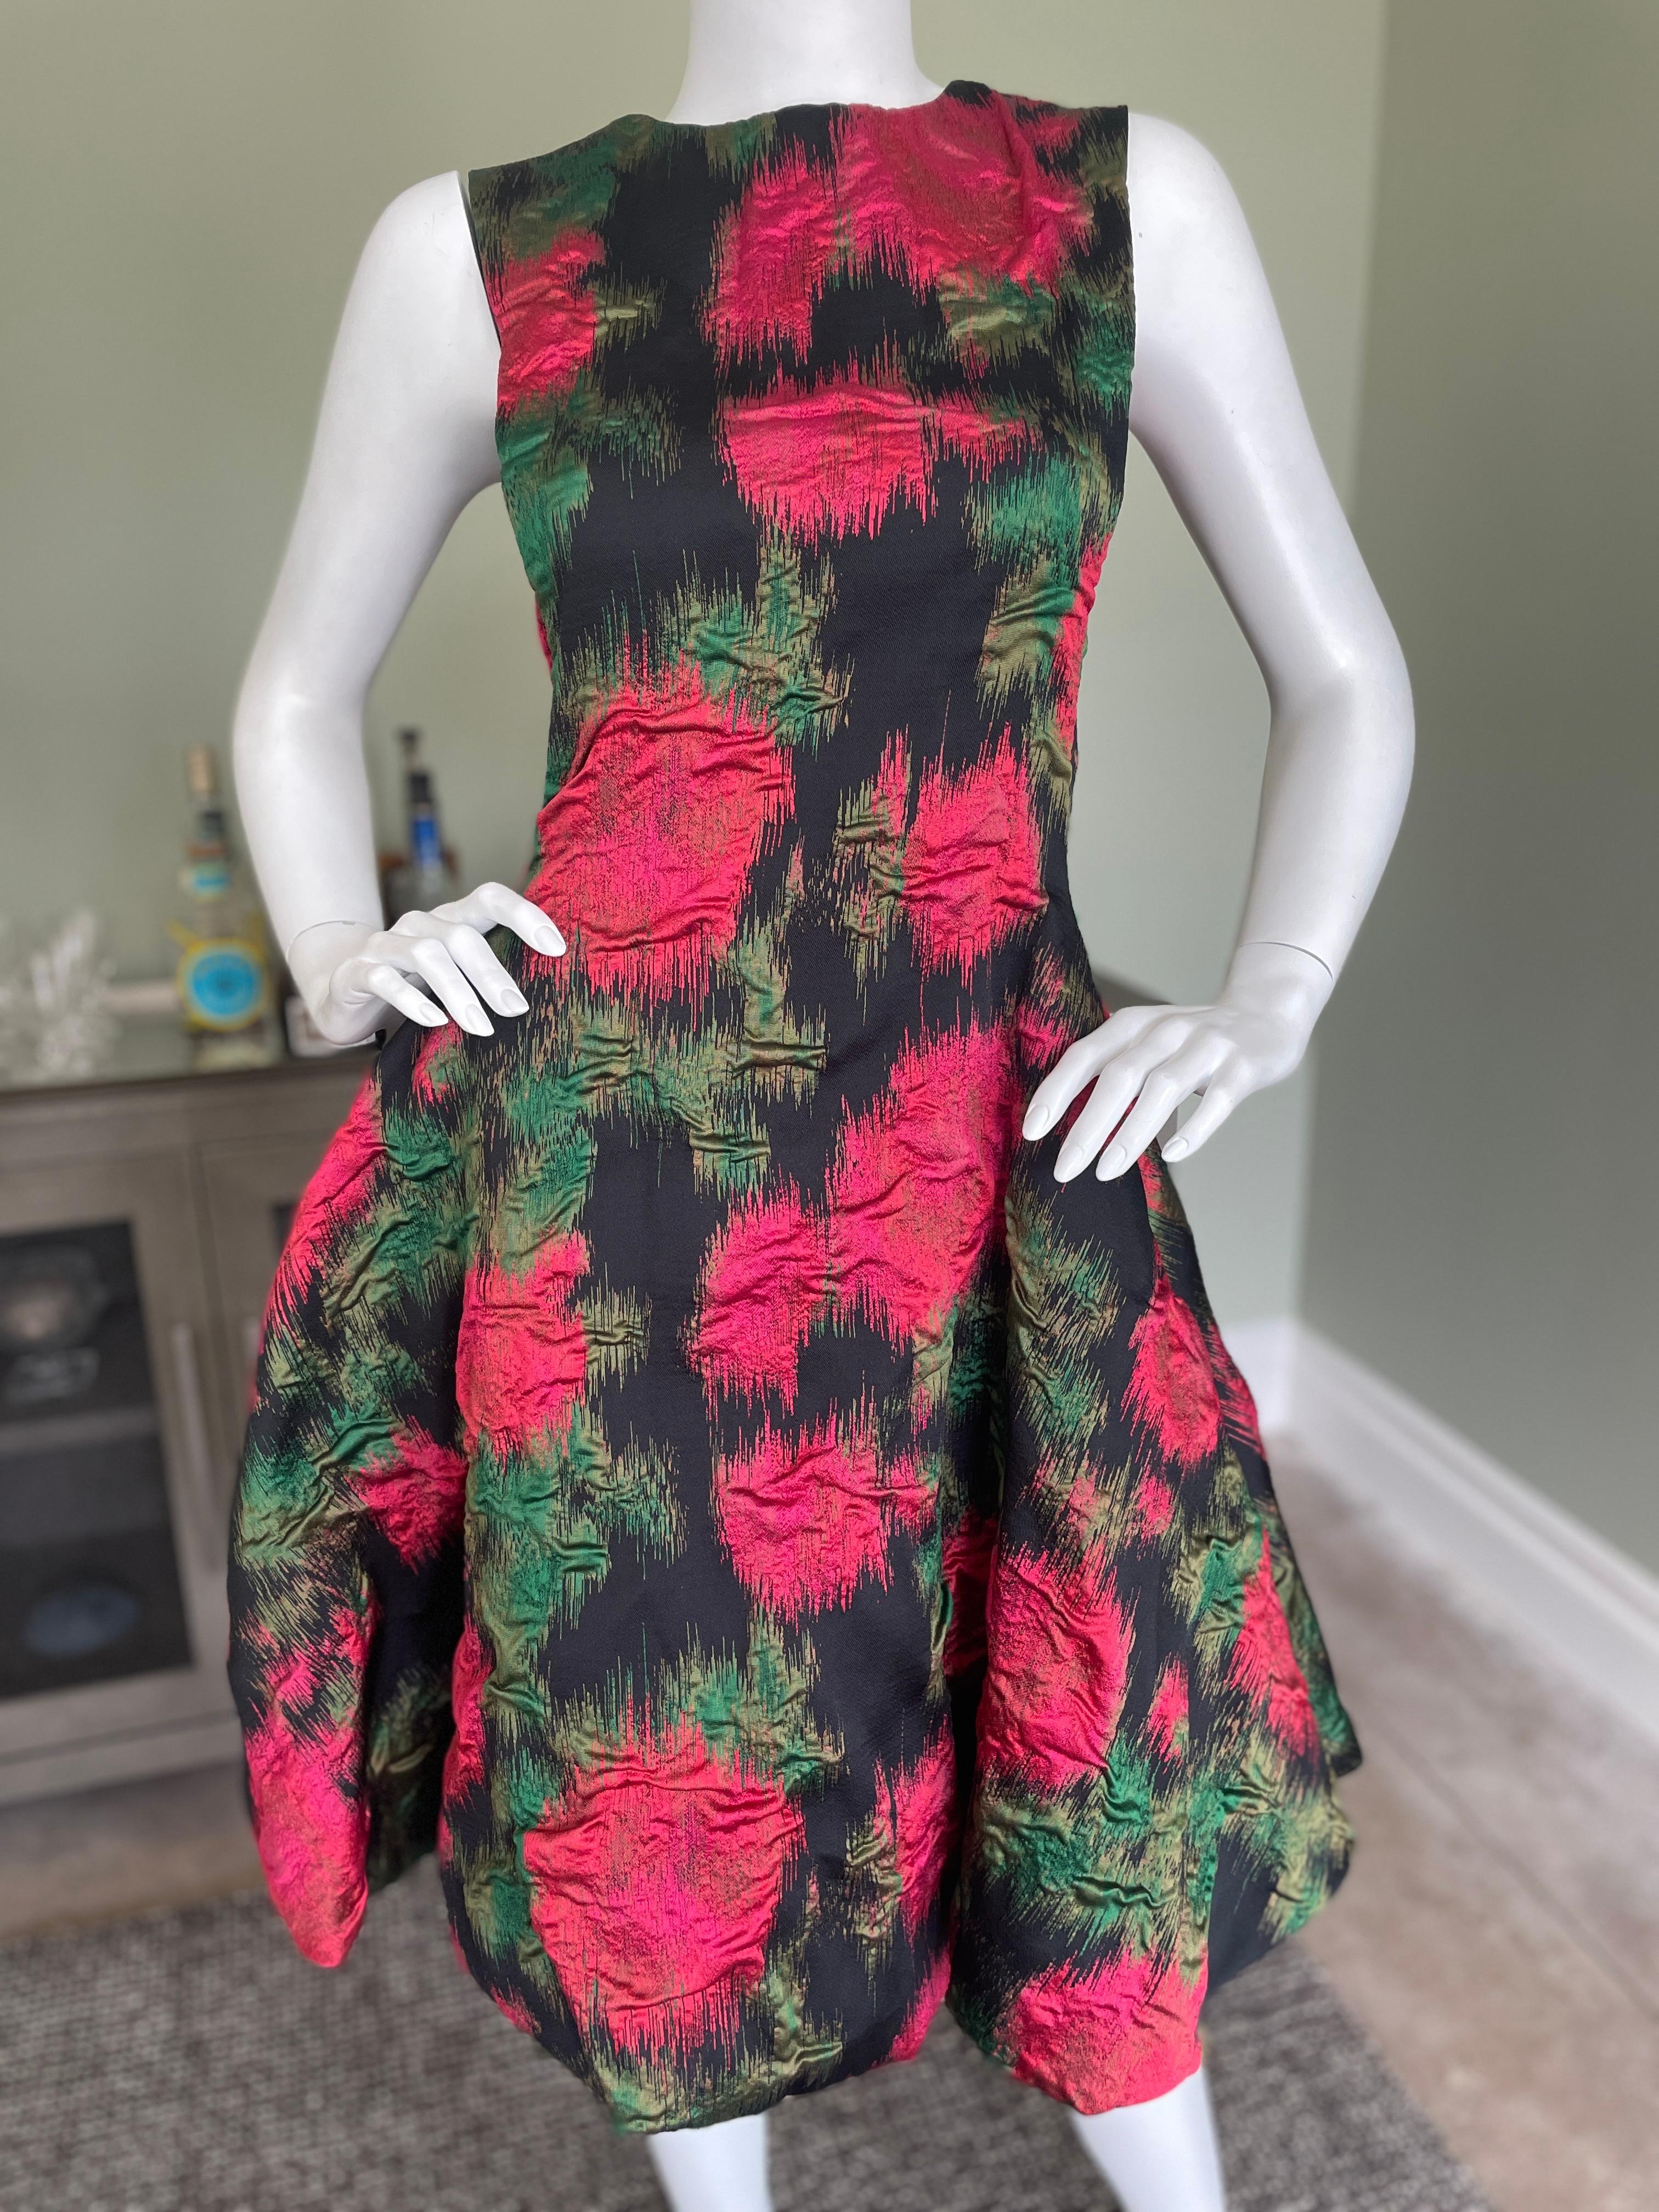 Lanvin by Alber Elbaz Elegant Textural Sleeveless Floral Print Cocktail Dress .
From Fall 2015.
This is a very unusual 3D textural fabric, with abstract flowers, very pretty.
Size 36
Bust 34